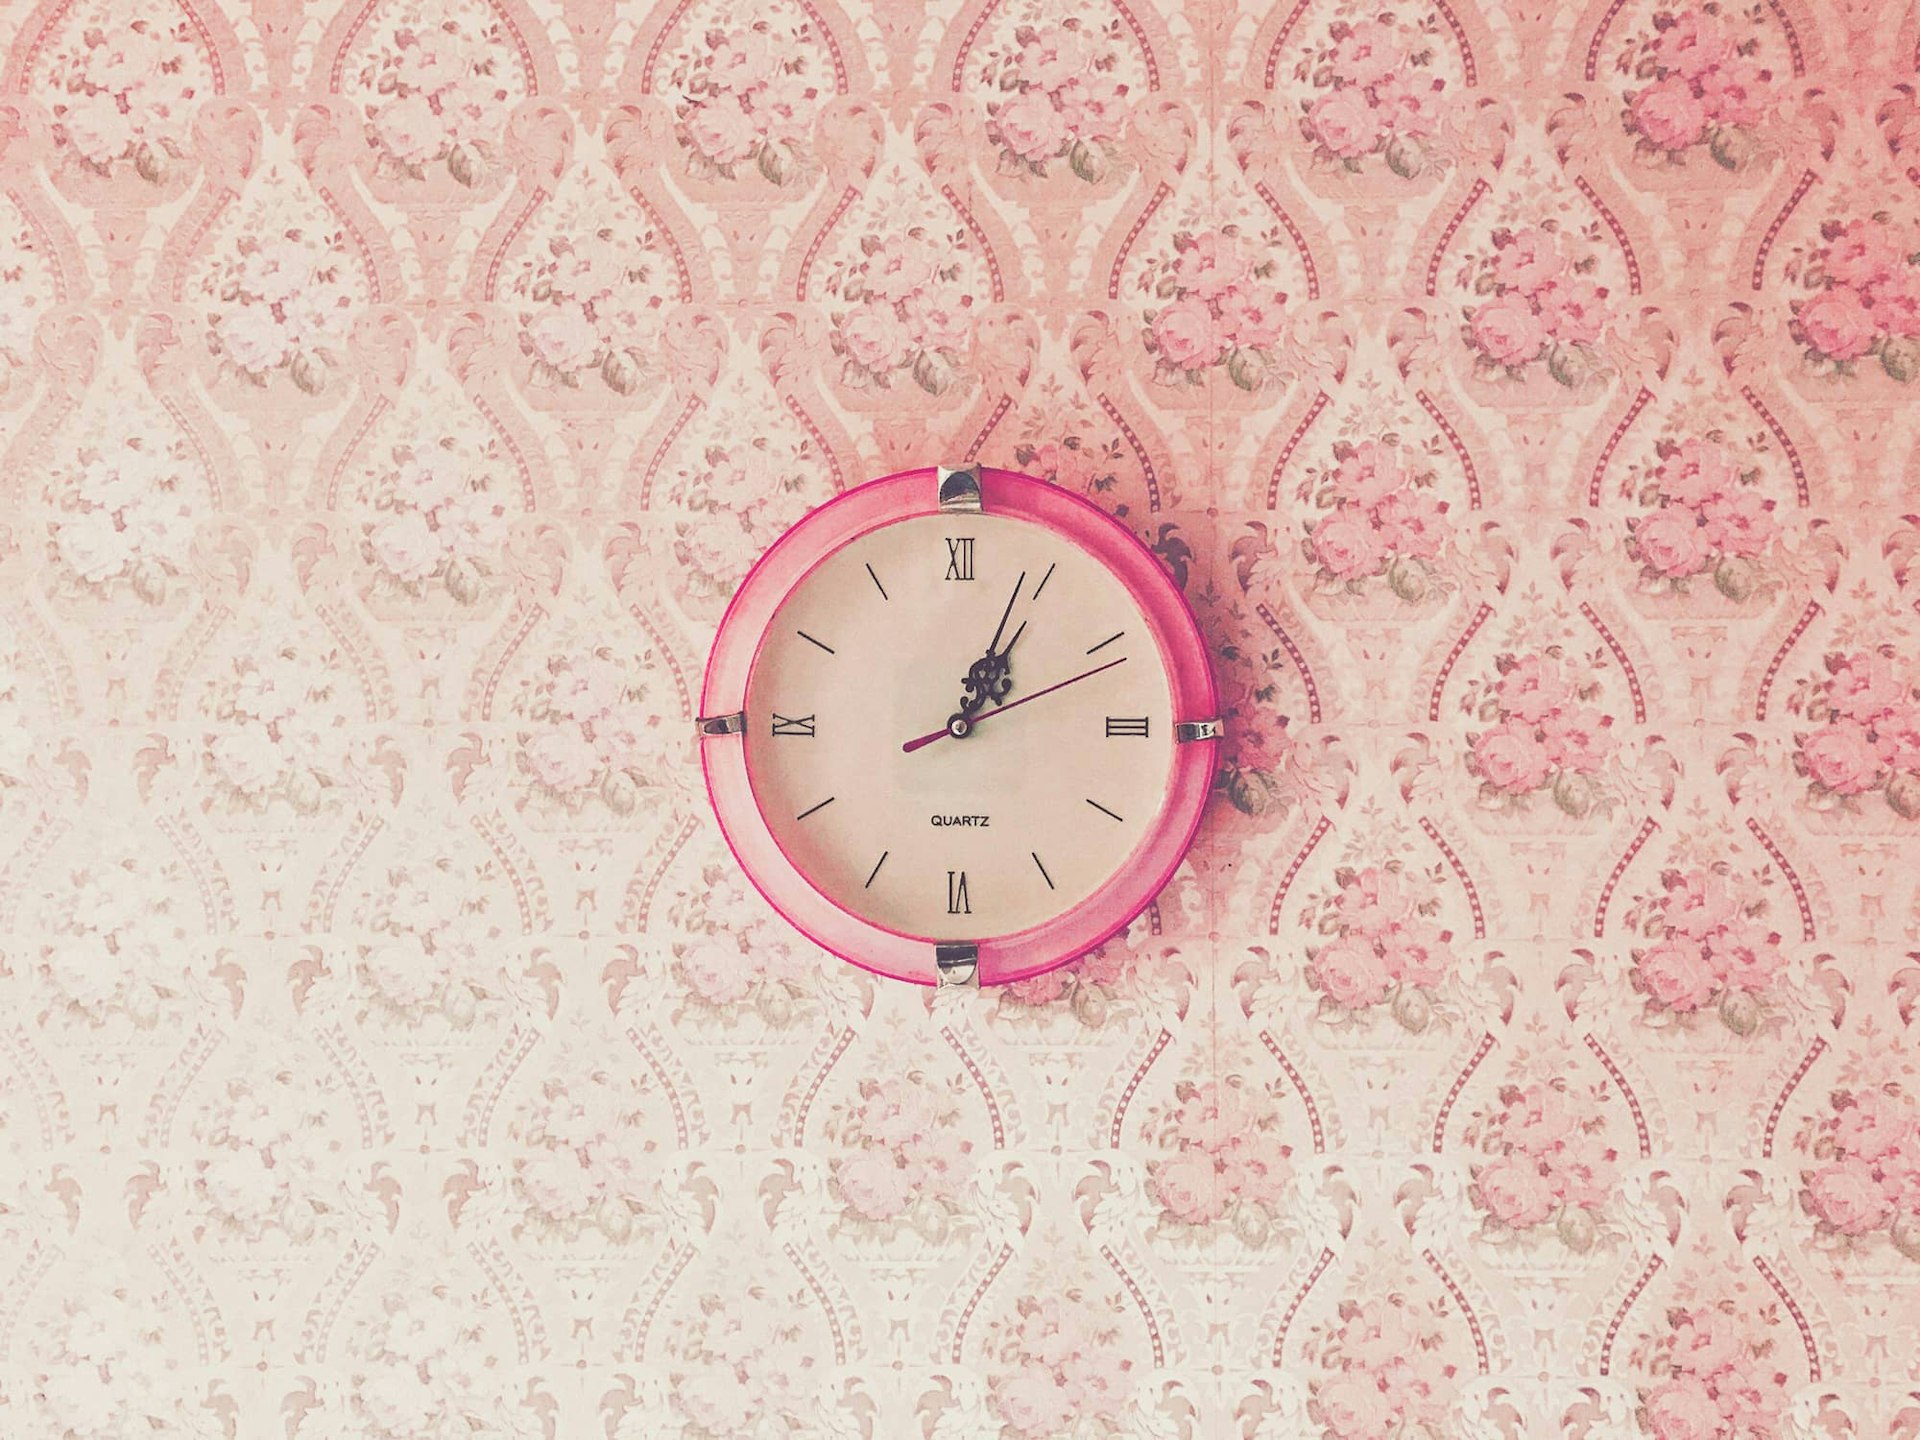 A pink clock with roman numerals hanging on a wall of garish wallpaper.